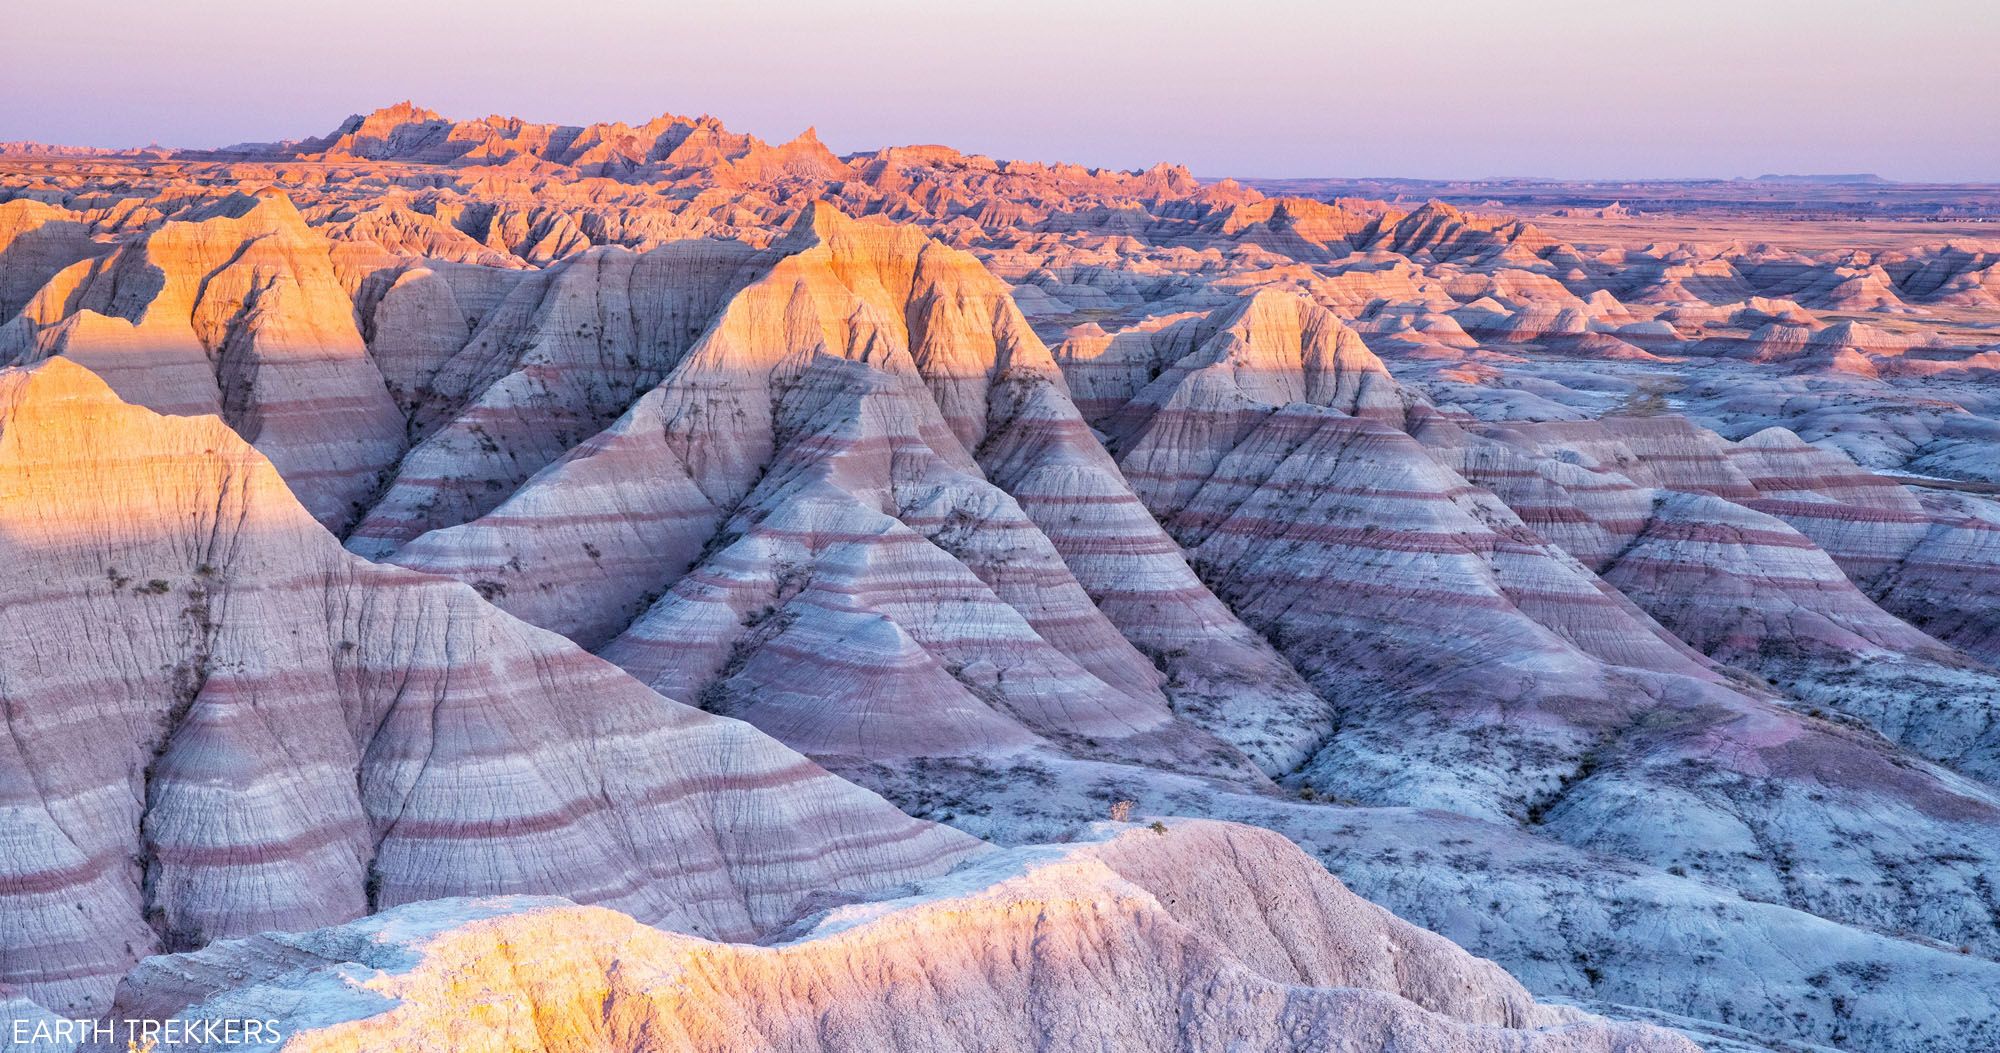 Featured image for “One Perfect Day in Badlands National Park”